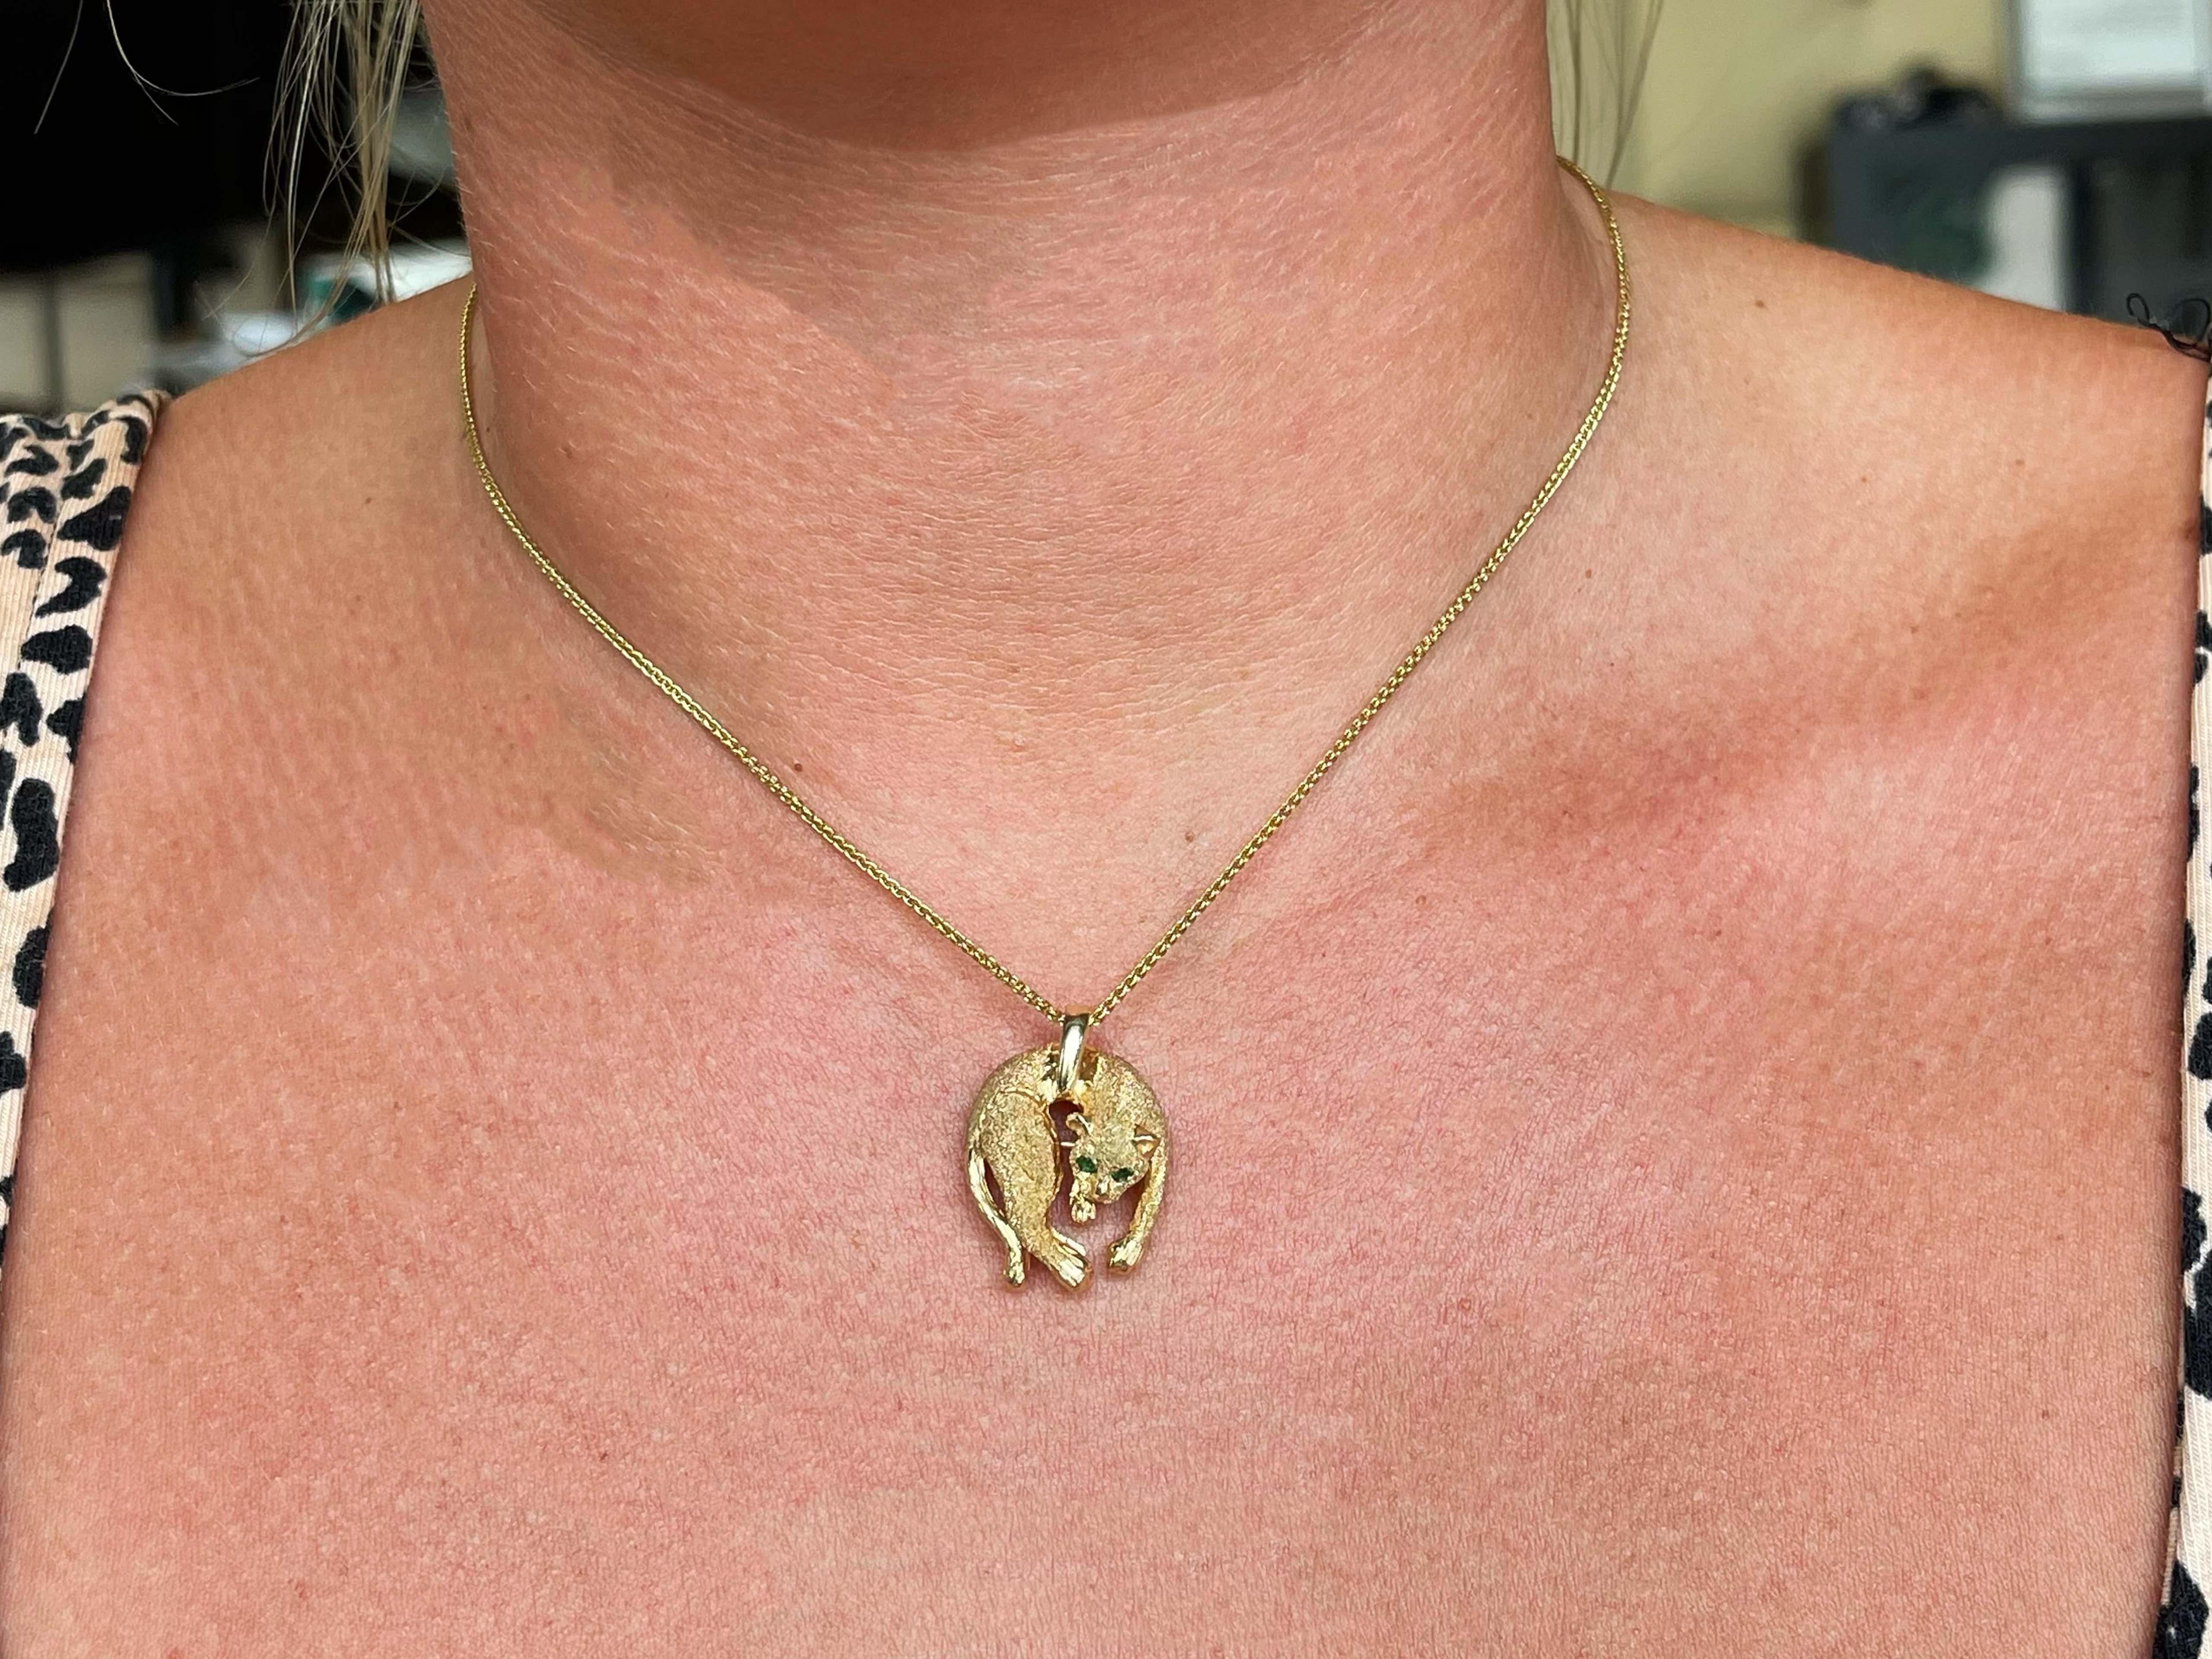 Item Specifications:

Necklace Metal: 14k Yellow Gold

Total Weight: 8.0 Grams

Stamped: 